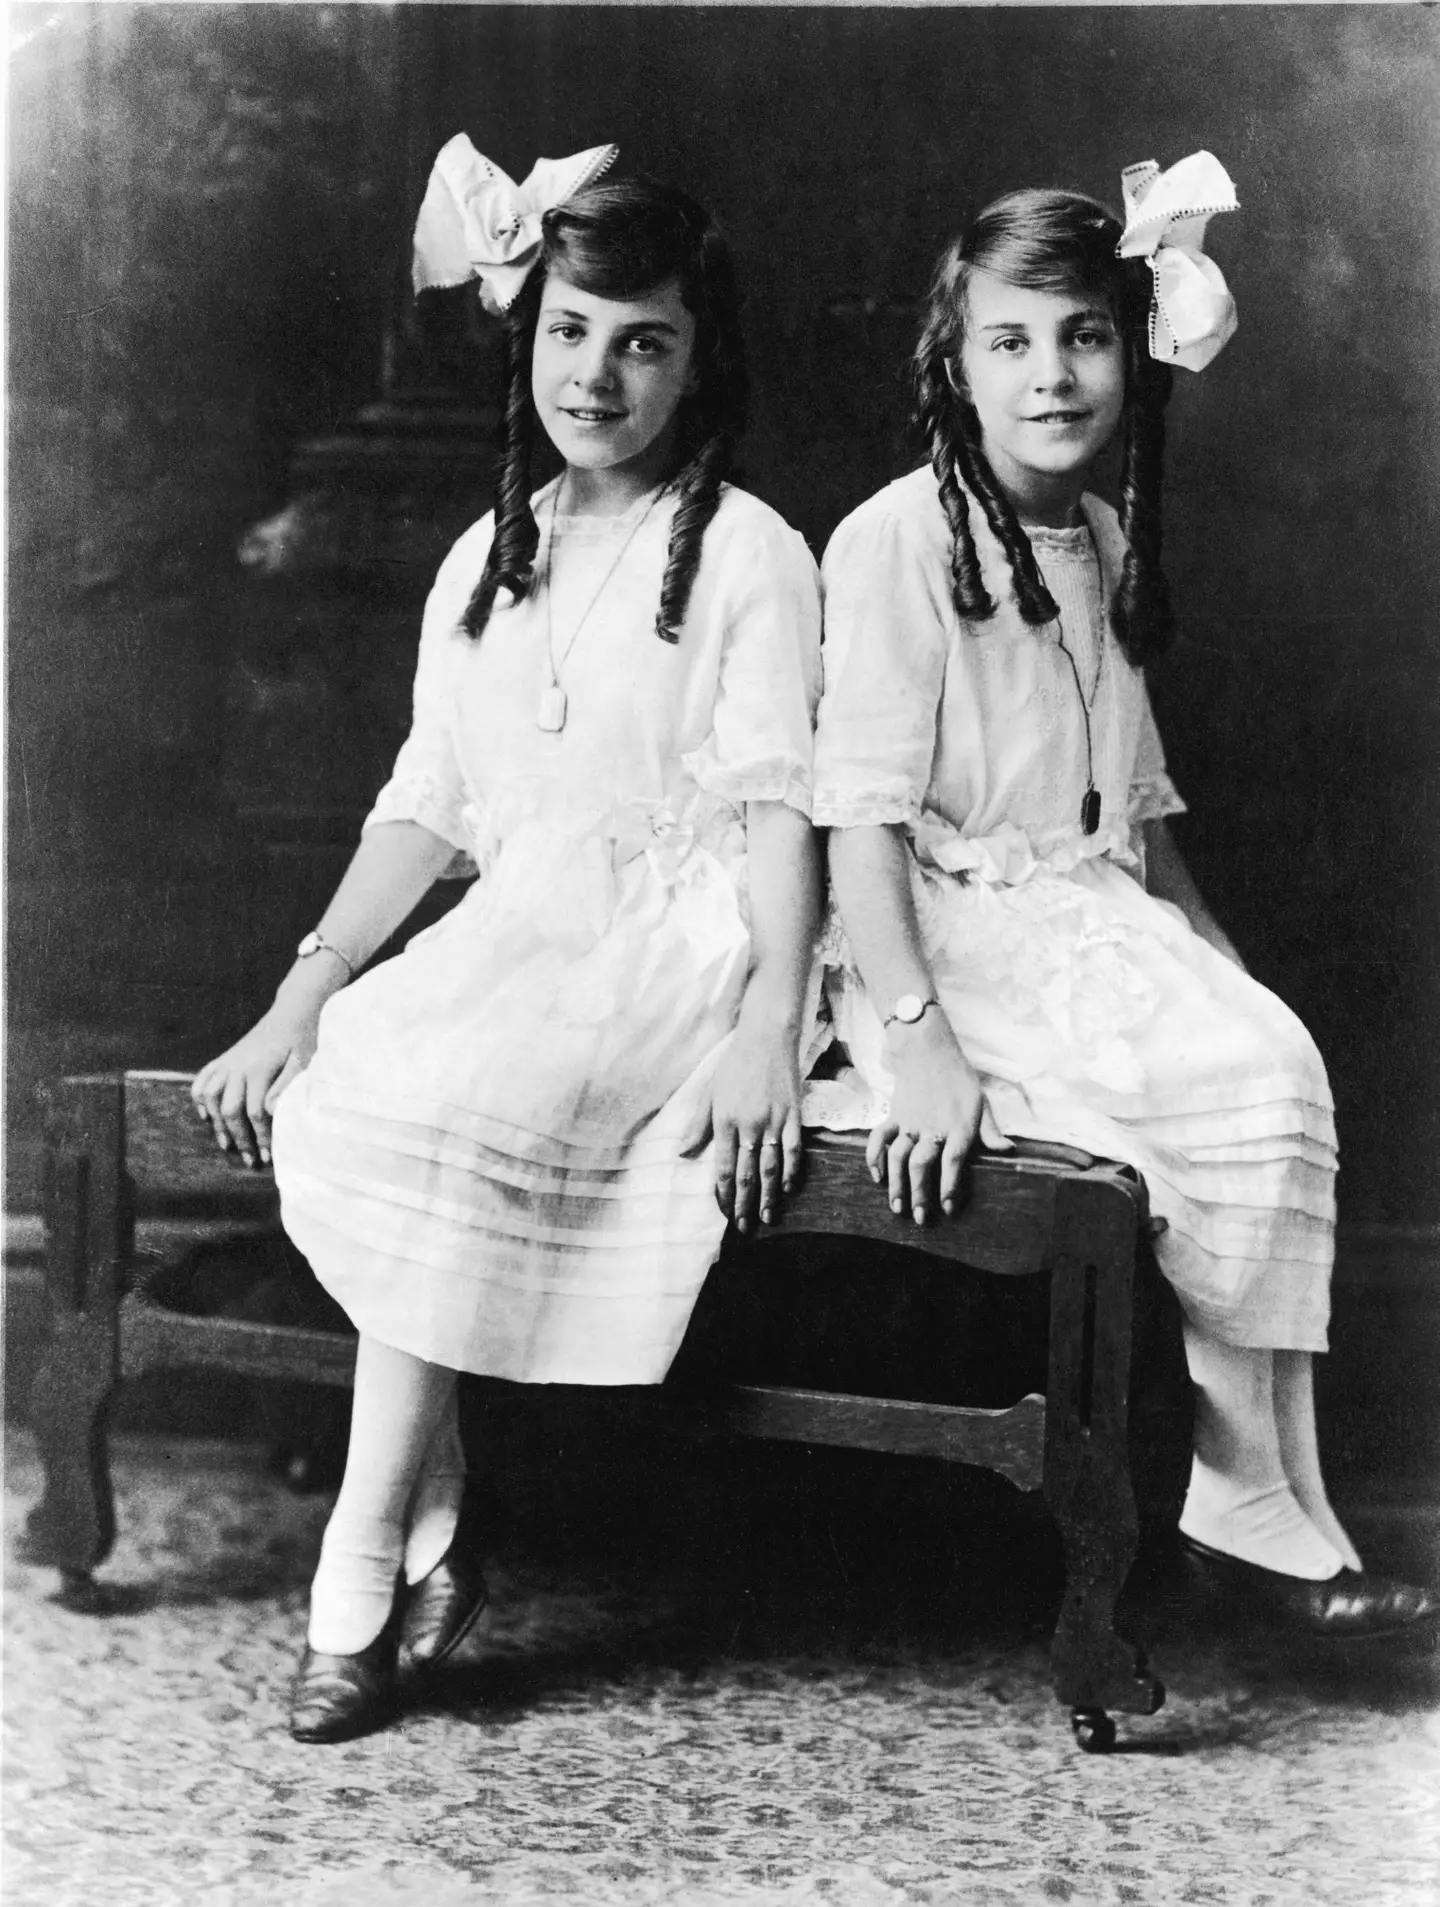 The twins went on to star in various films and have inspired theatre productions.